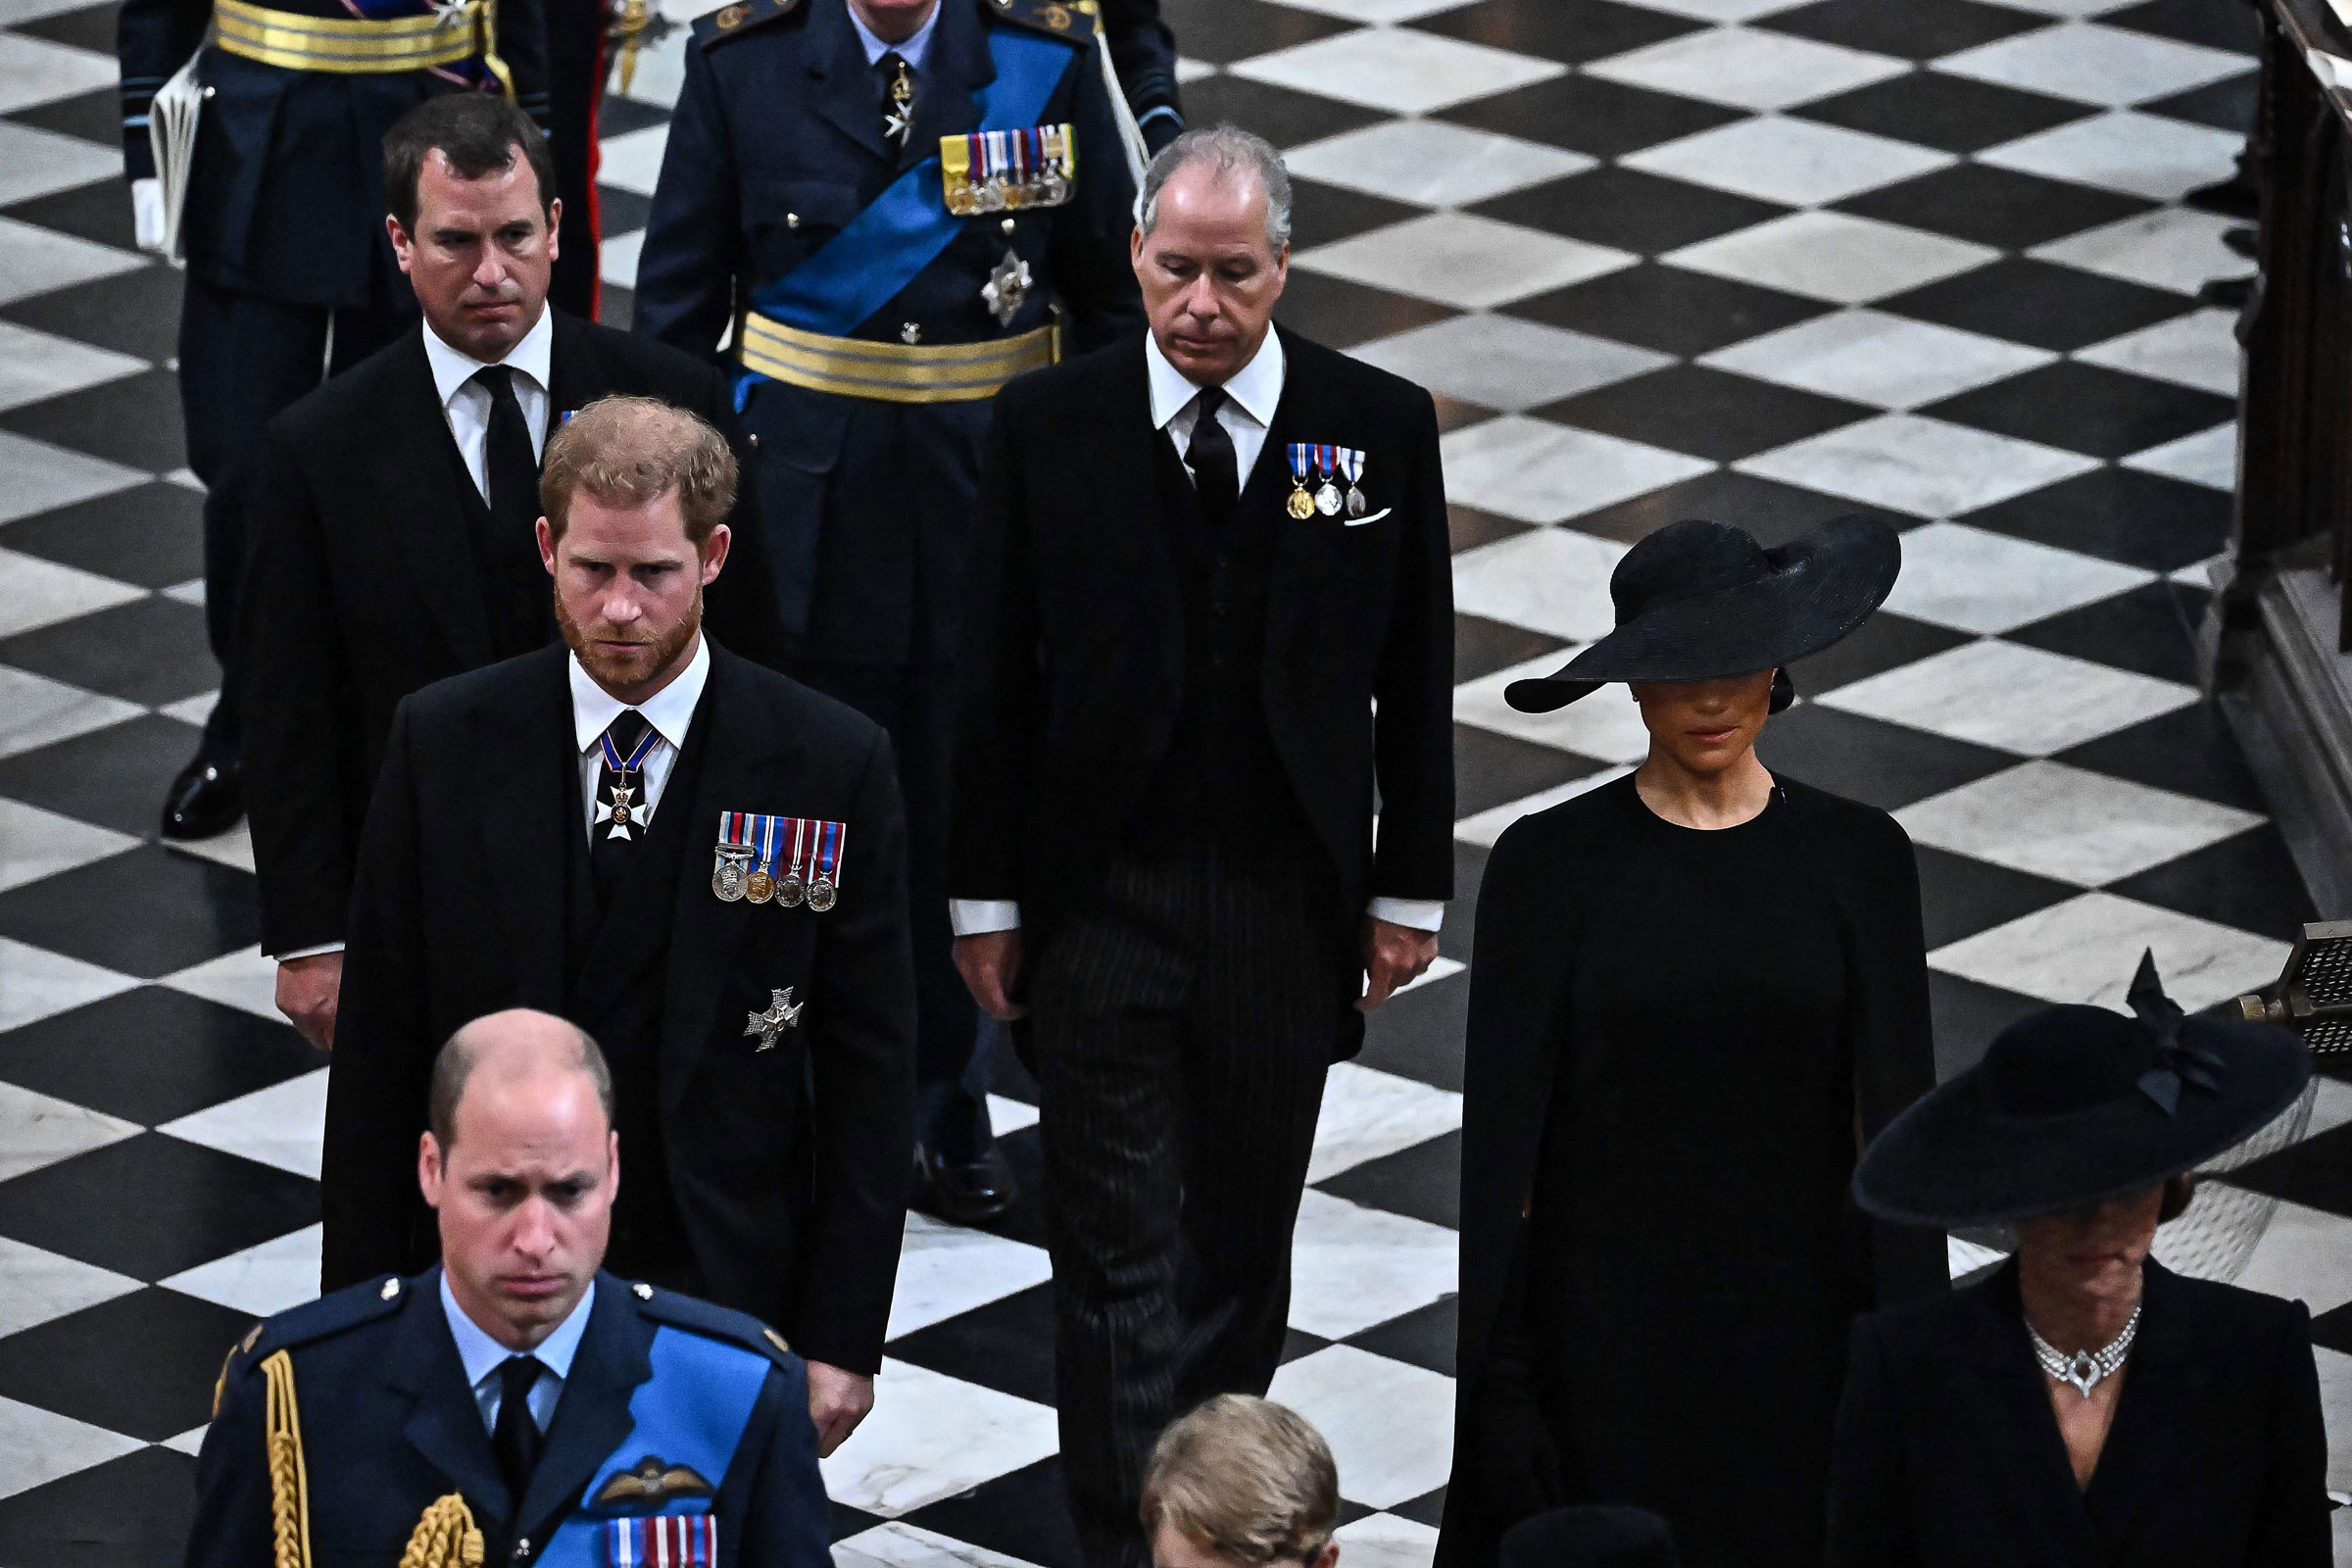 Peter Phillips (L), Britain's Prince Harry, Duke of Sussex (centre left), Britain's Prince William, Prince of Wales (bottom left), Britain's Earl of Snowdon (C) and Britain's Meghan, Duchess of Sussex (R) leave the Abbey at the State Funeral Service for Britain's Queen Elizabeth II, at Westminster Abbey in London on September 19, 2022.